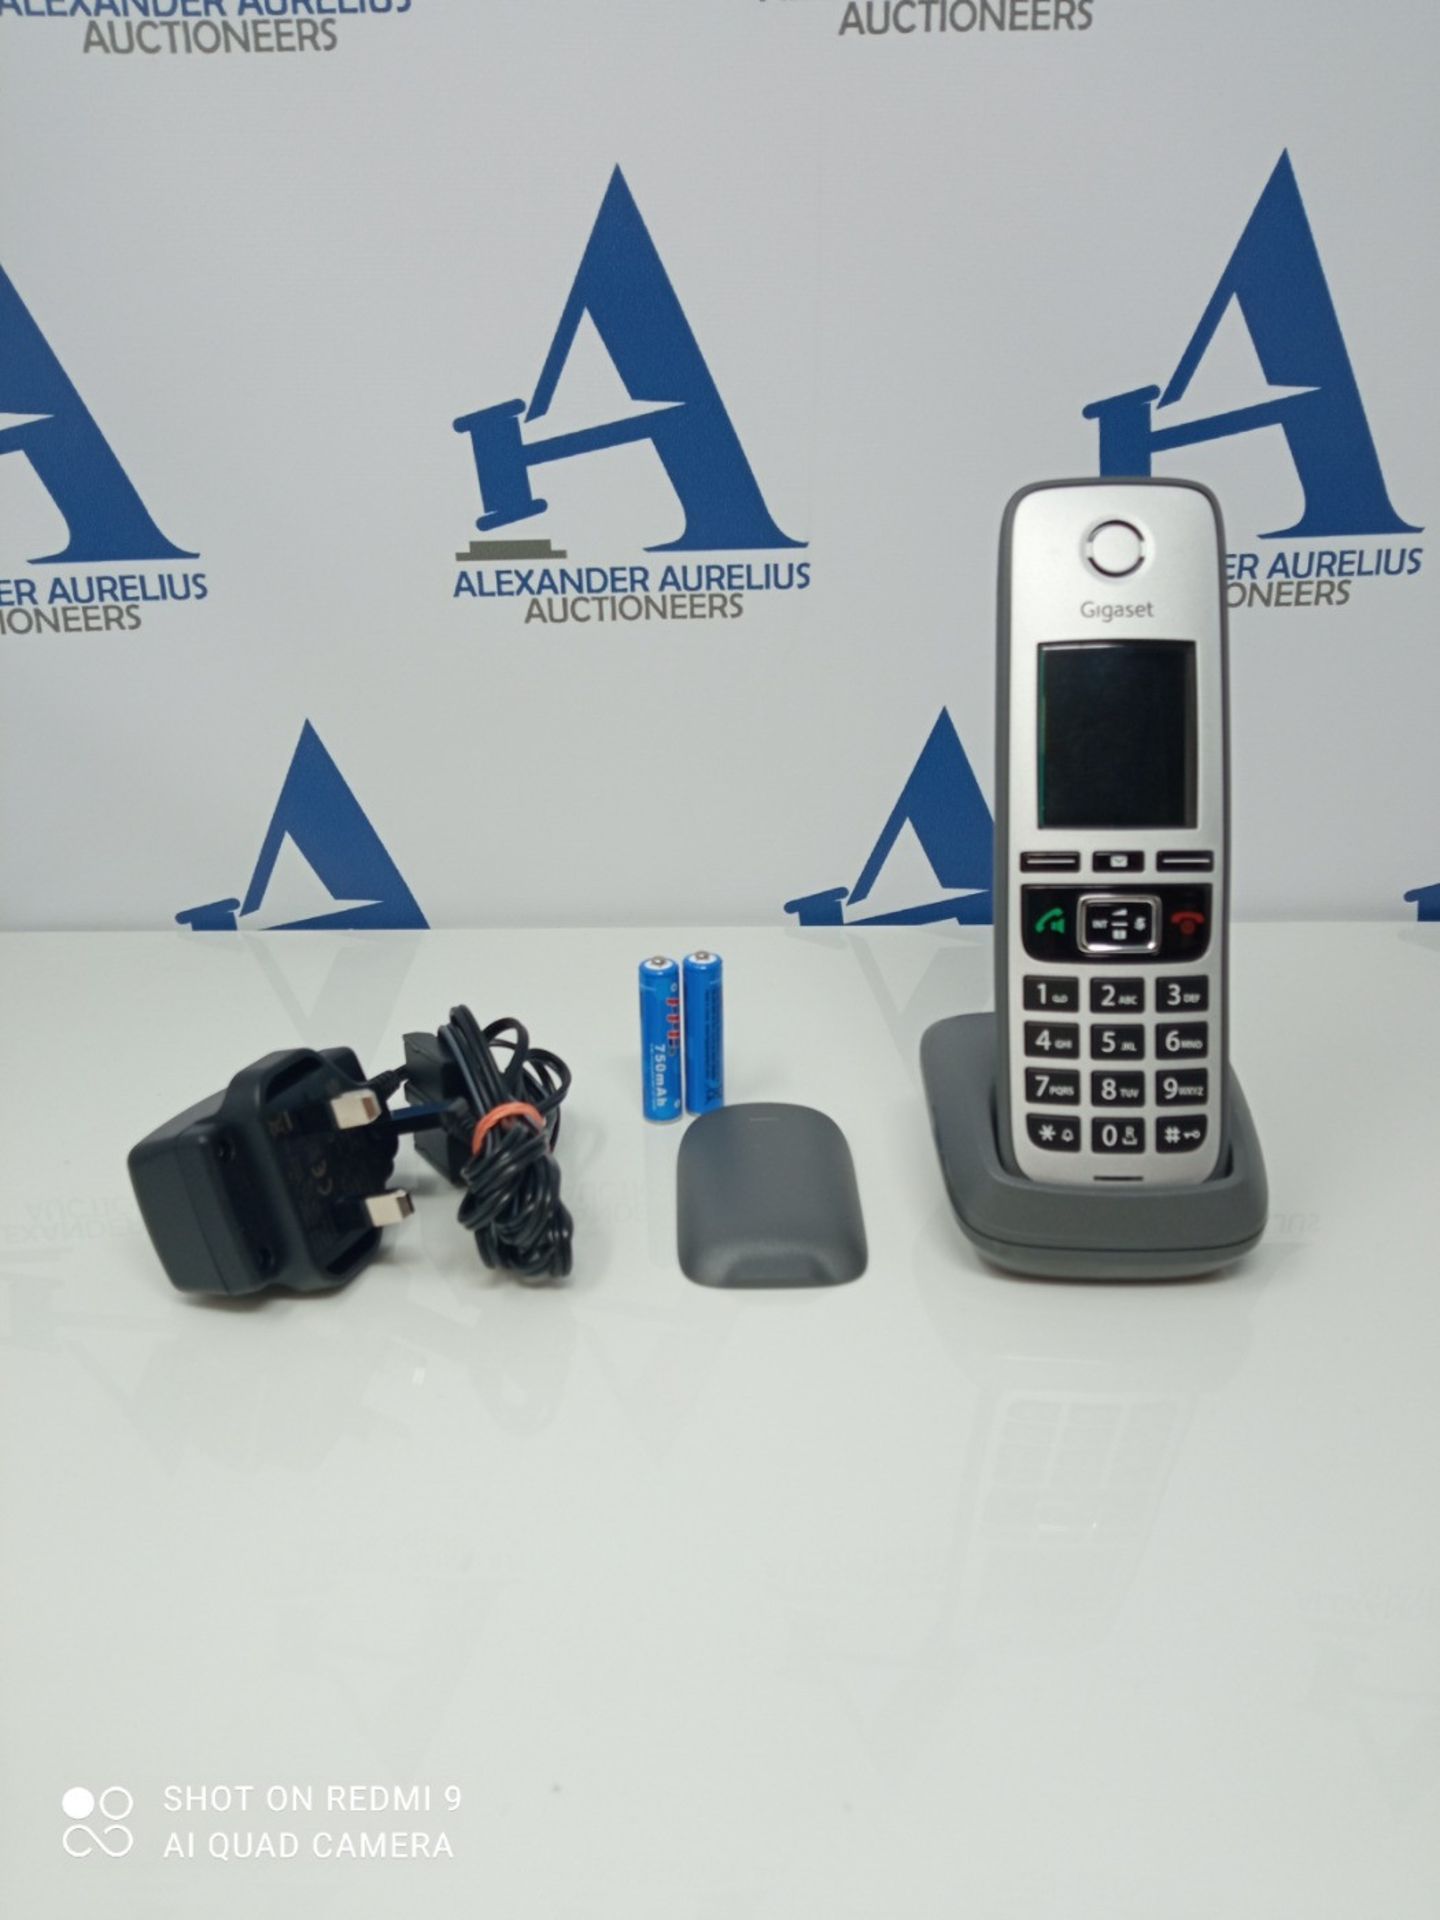 Gigaset Family HX - additional handset for Gigaset Family cordless home telephone syst - Image 2 of 2